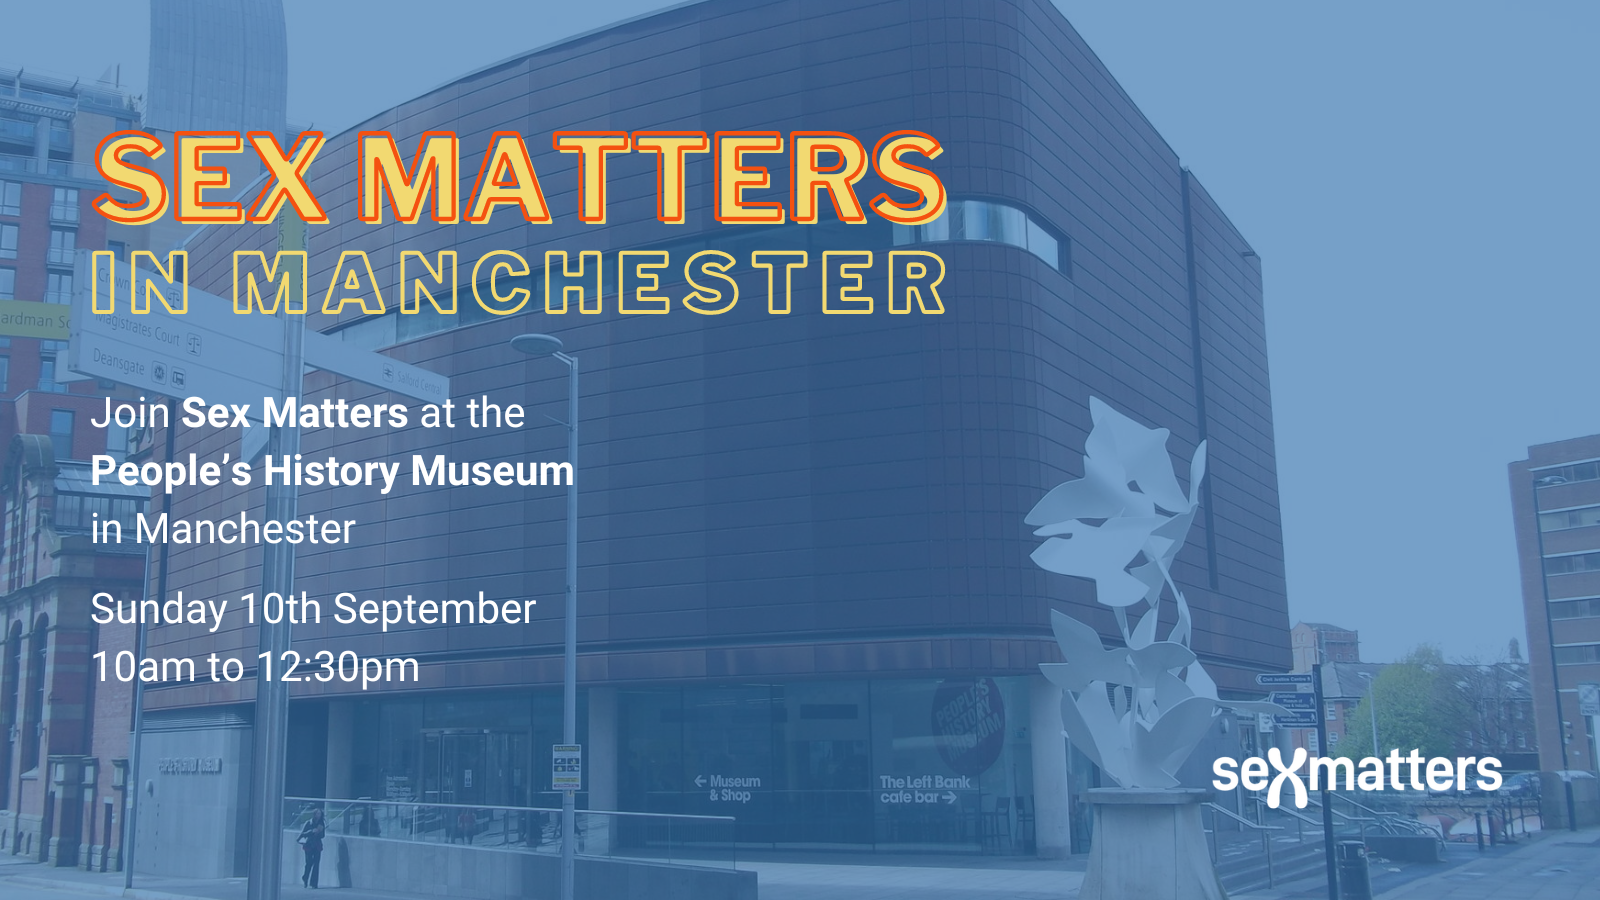 Sex Matters in Manchester Join Sex Matters at the People’s History Museum in Manchester Sunday 10th September 10am to 12:30pm